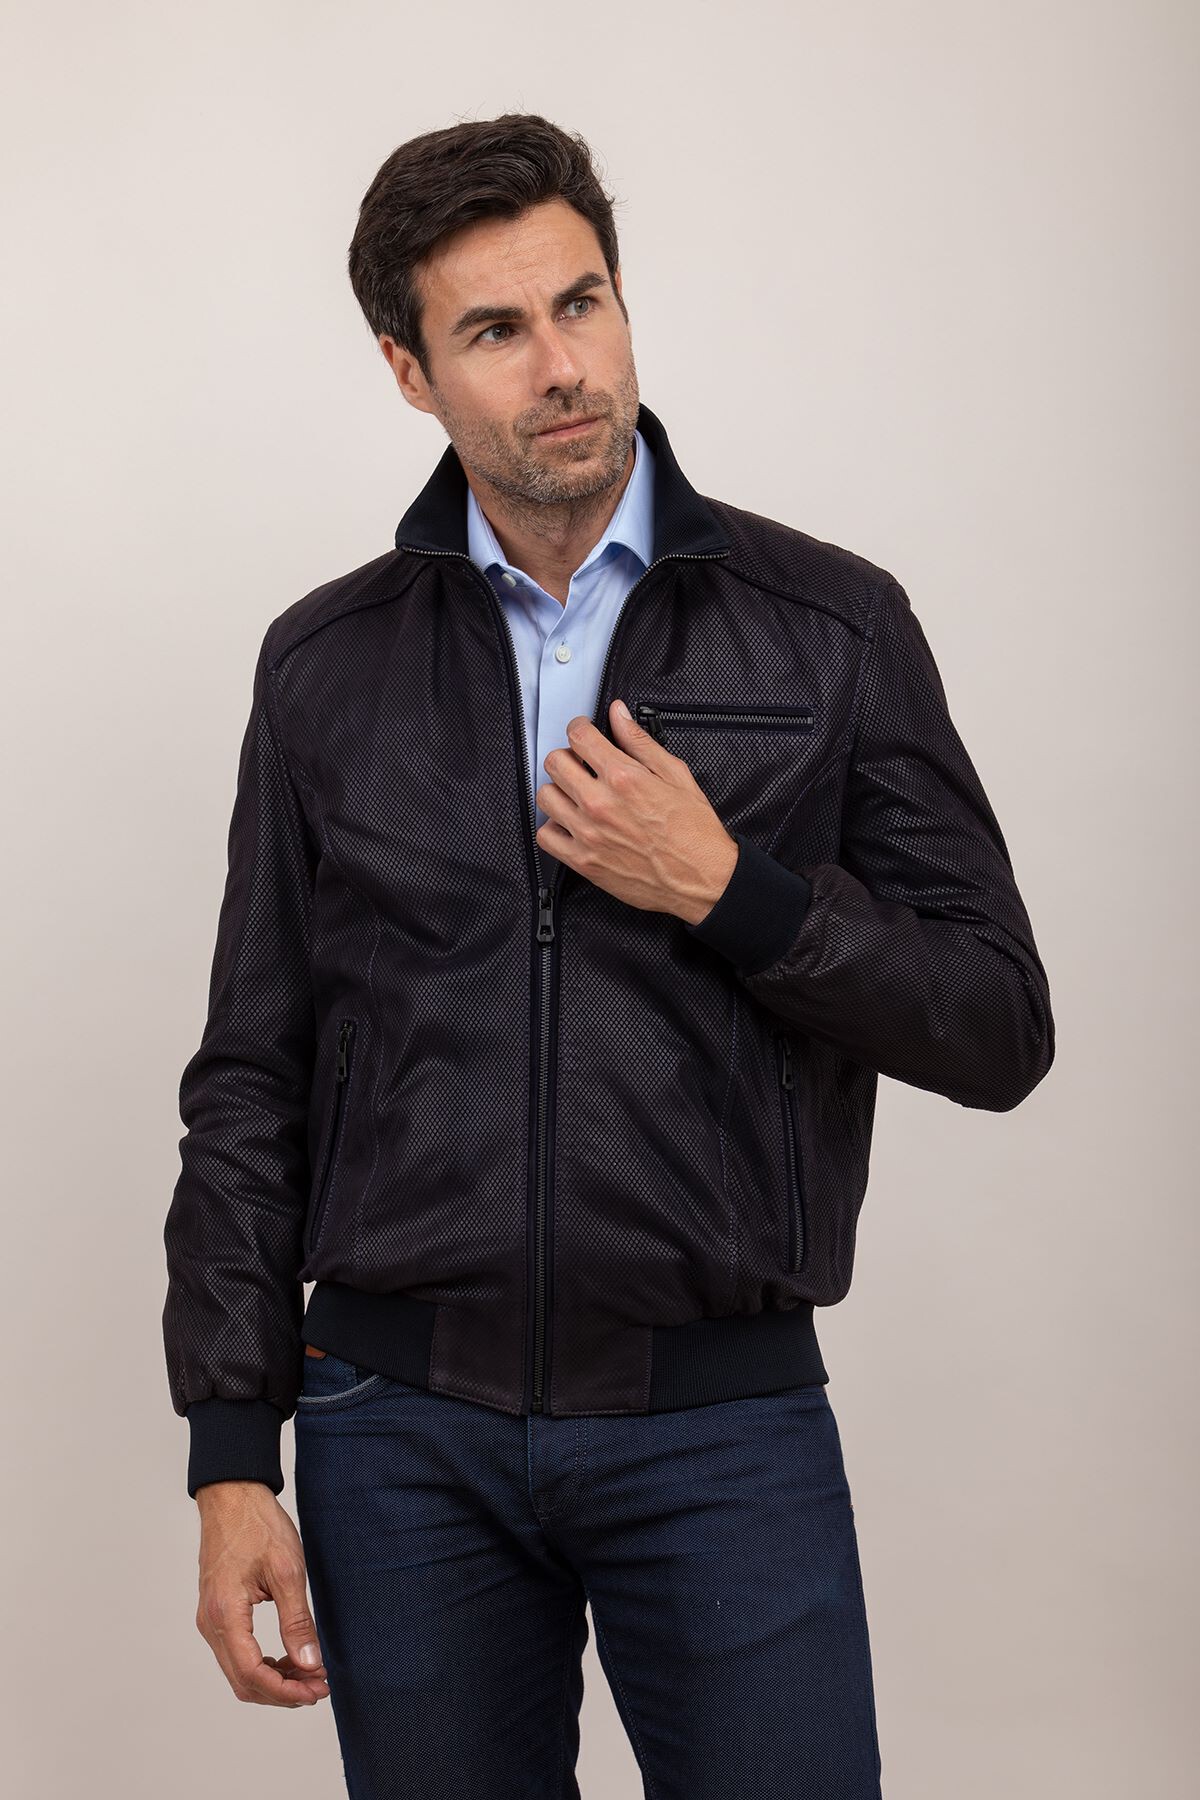 Picture of Men's navy blue leather jacket